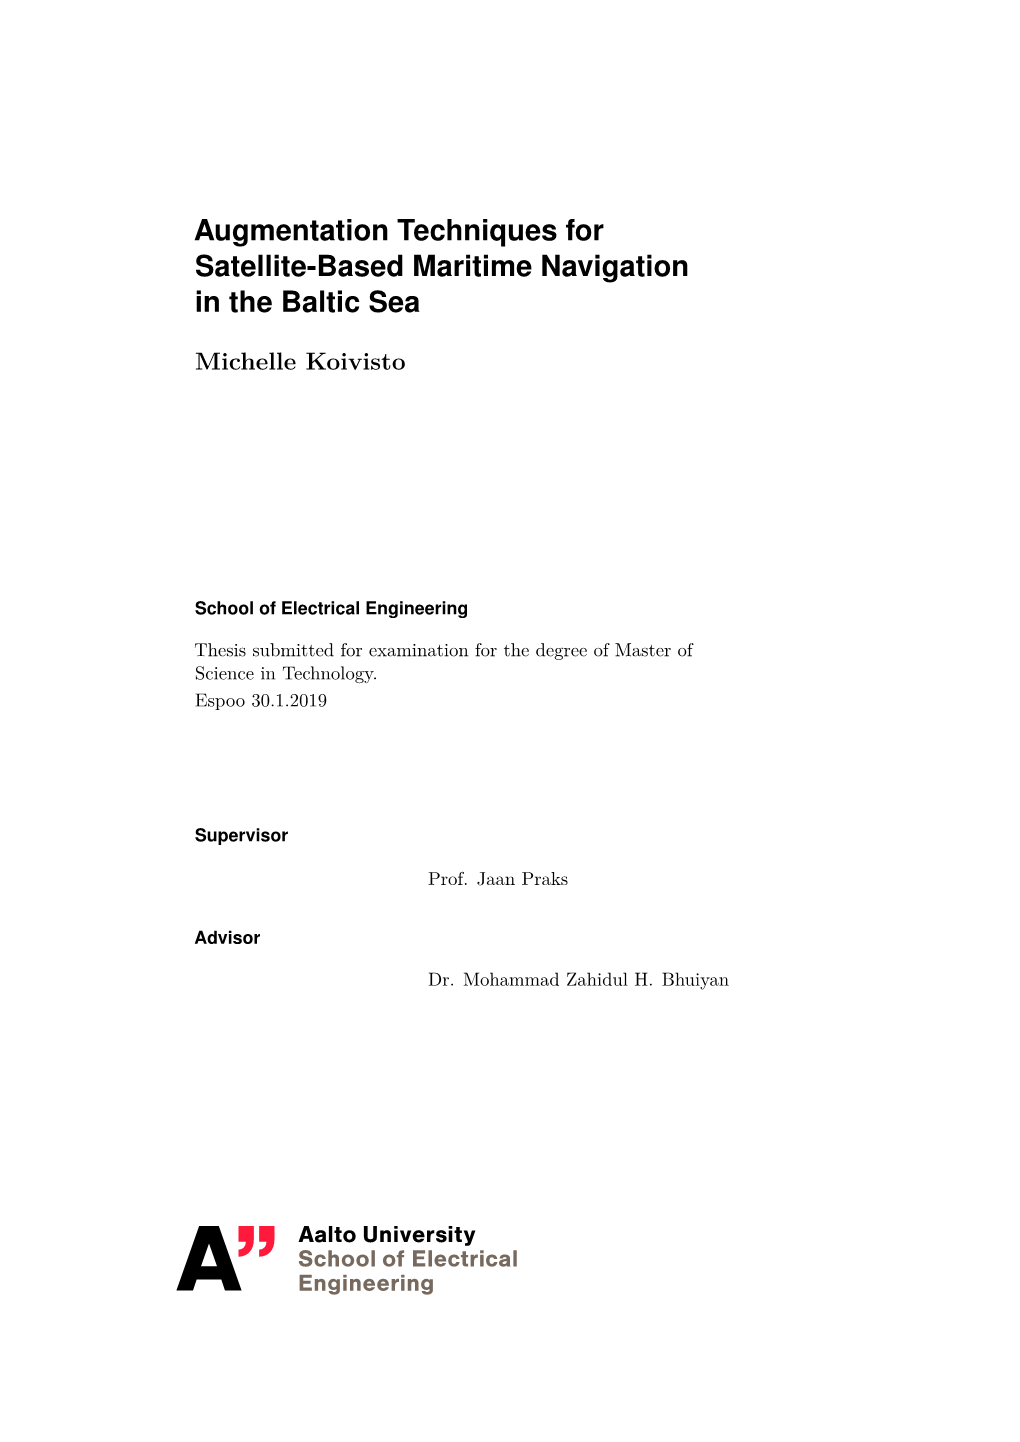 Augmentation Techniques for Satellite-Based Maritime Navigation in the Baltic Sea